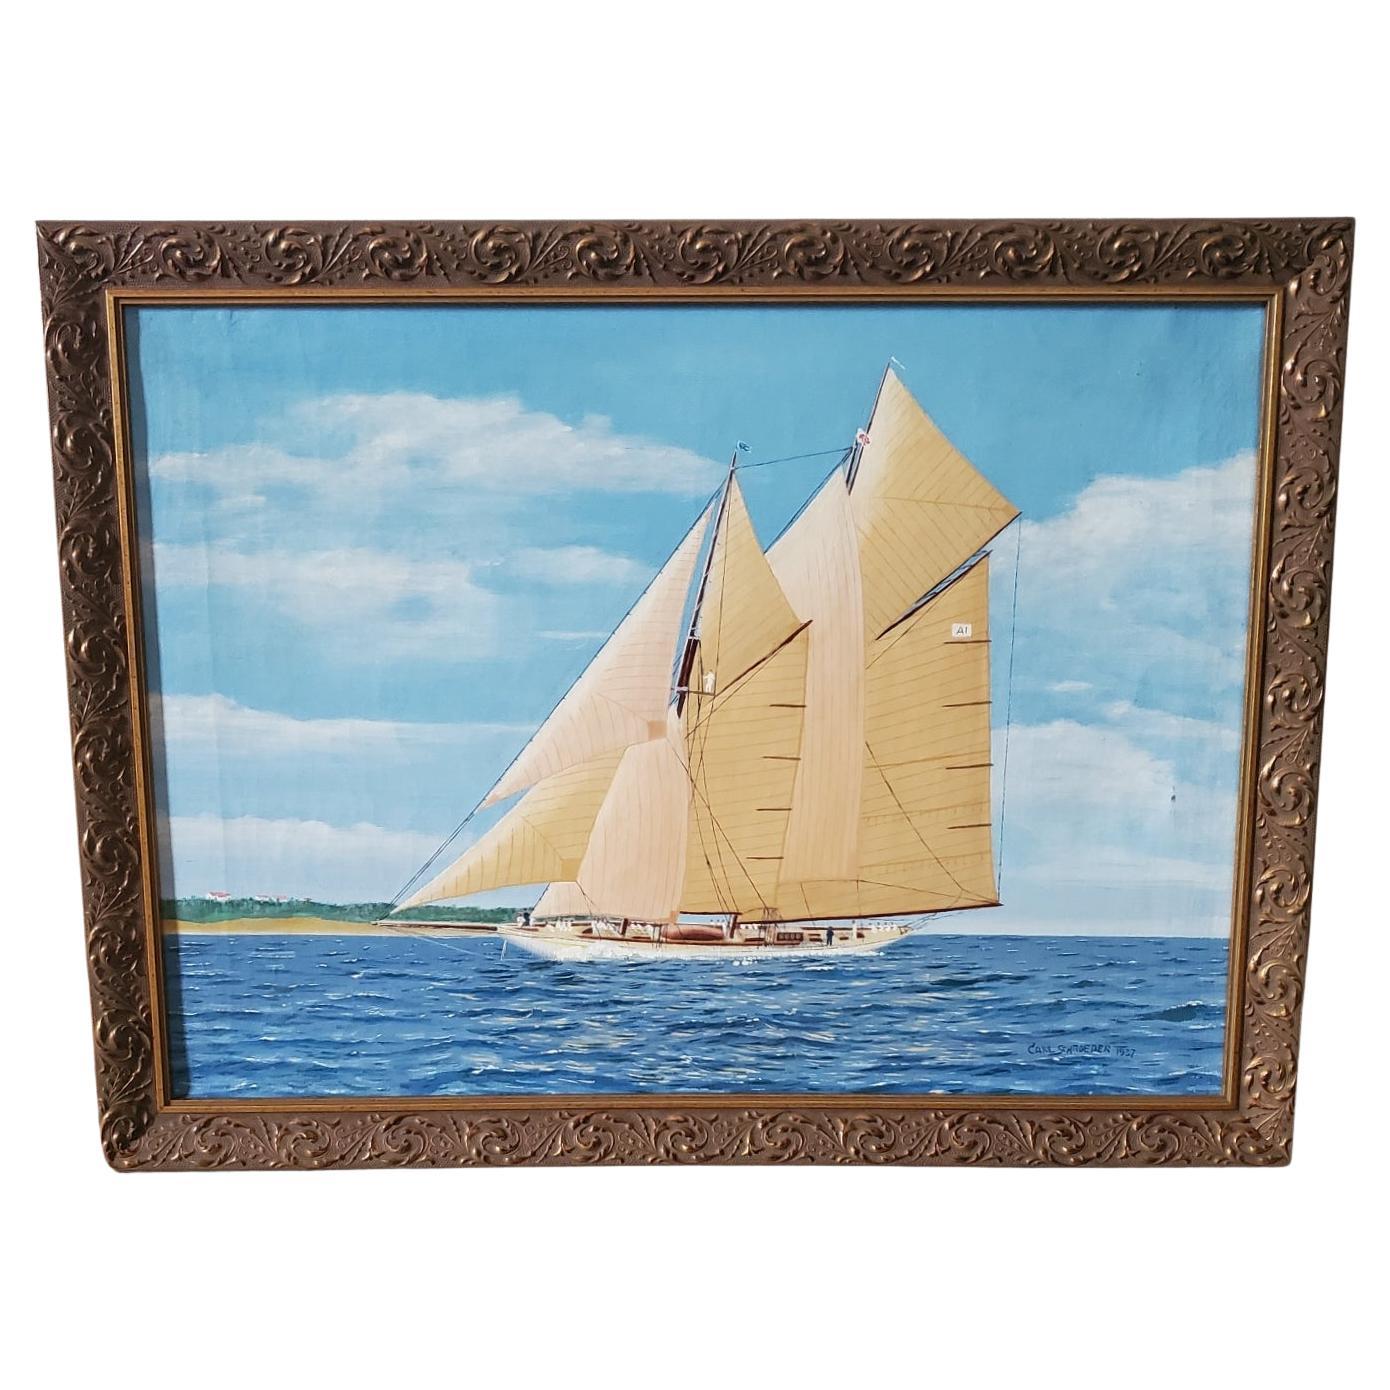 Seascape with Portrait of a Schooner-Rigged Yacht, Signed and Dated 1937 For Sale